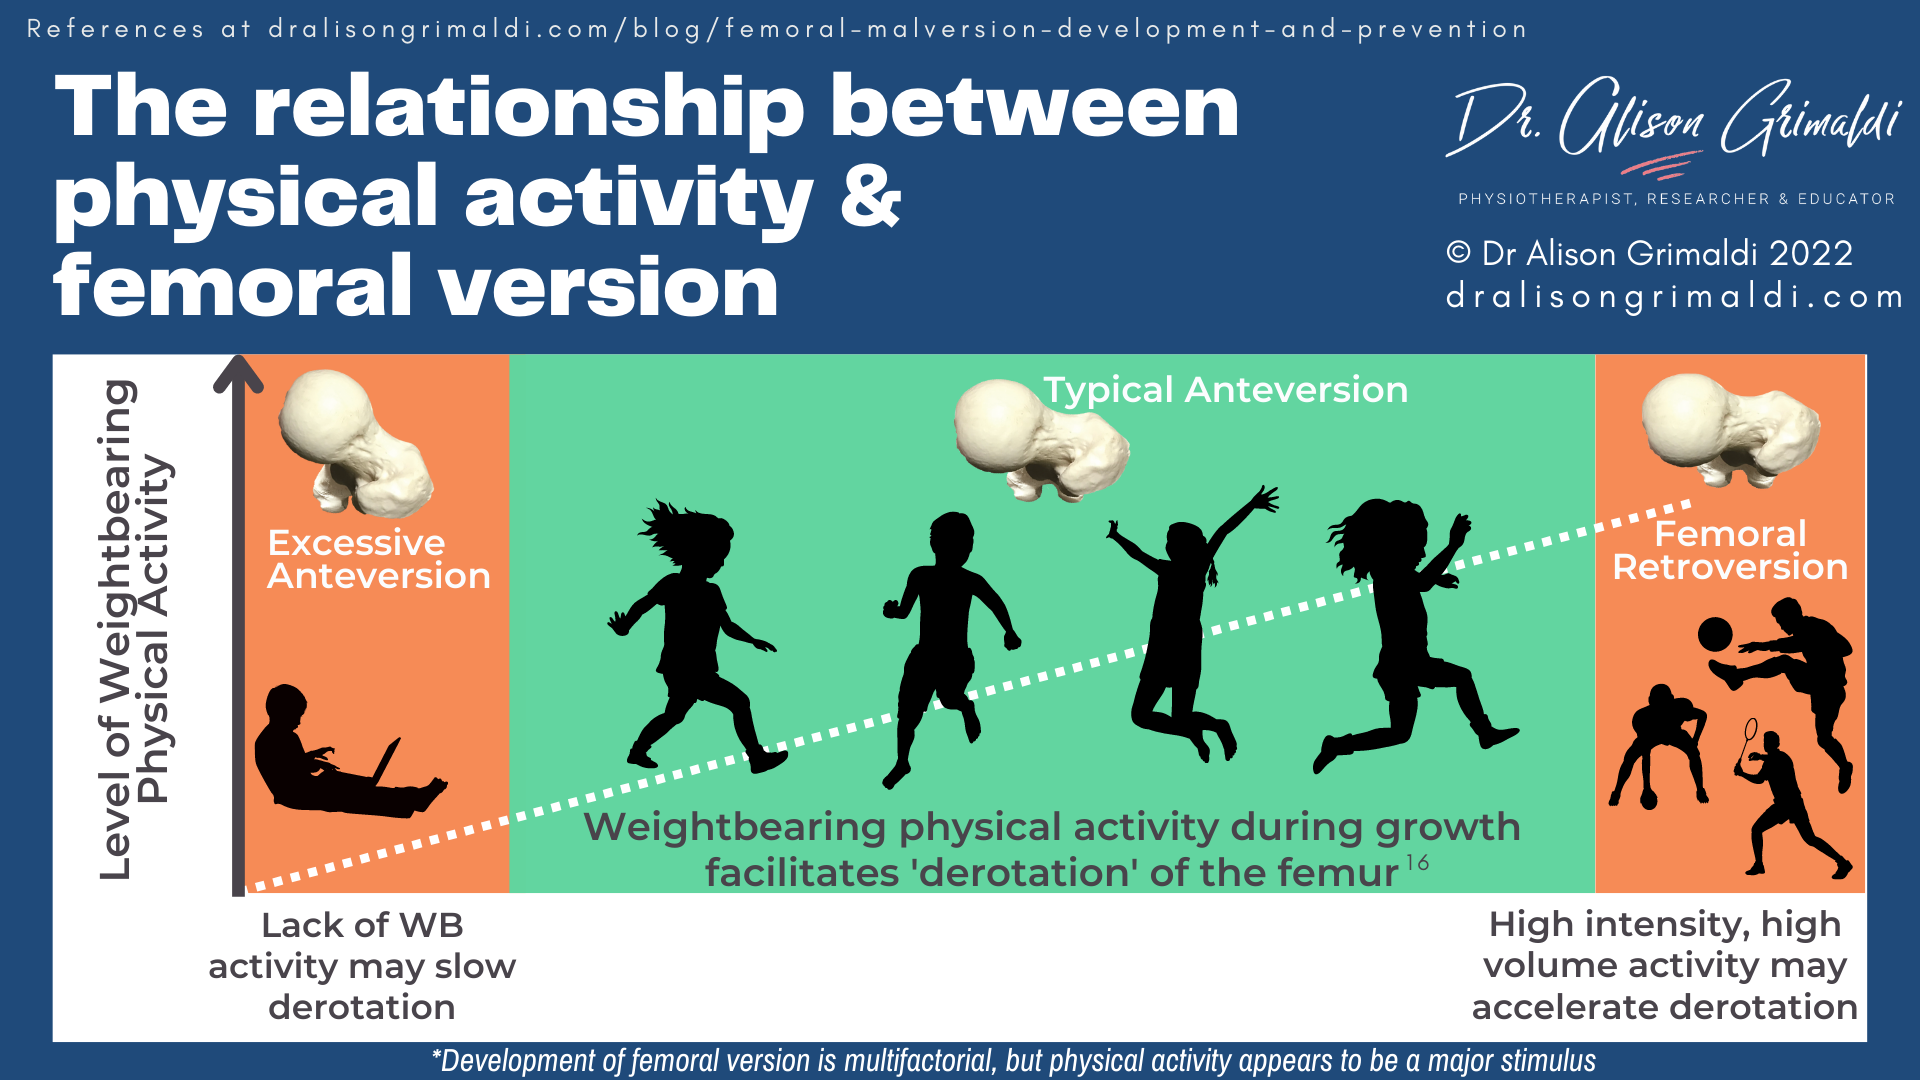 The relationship between physical activity & femoral version